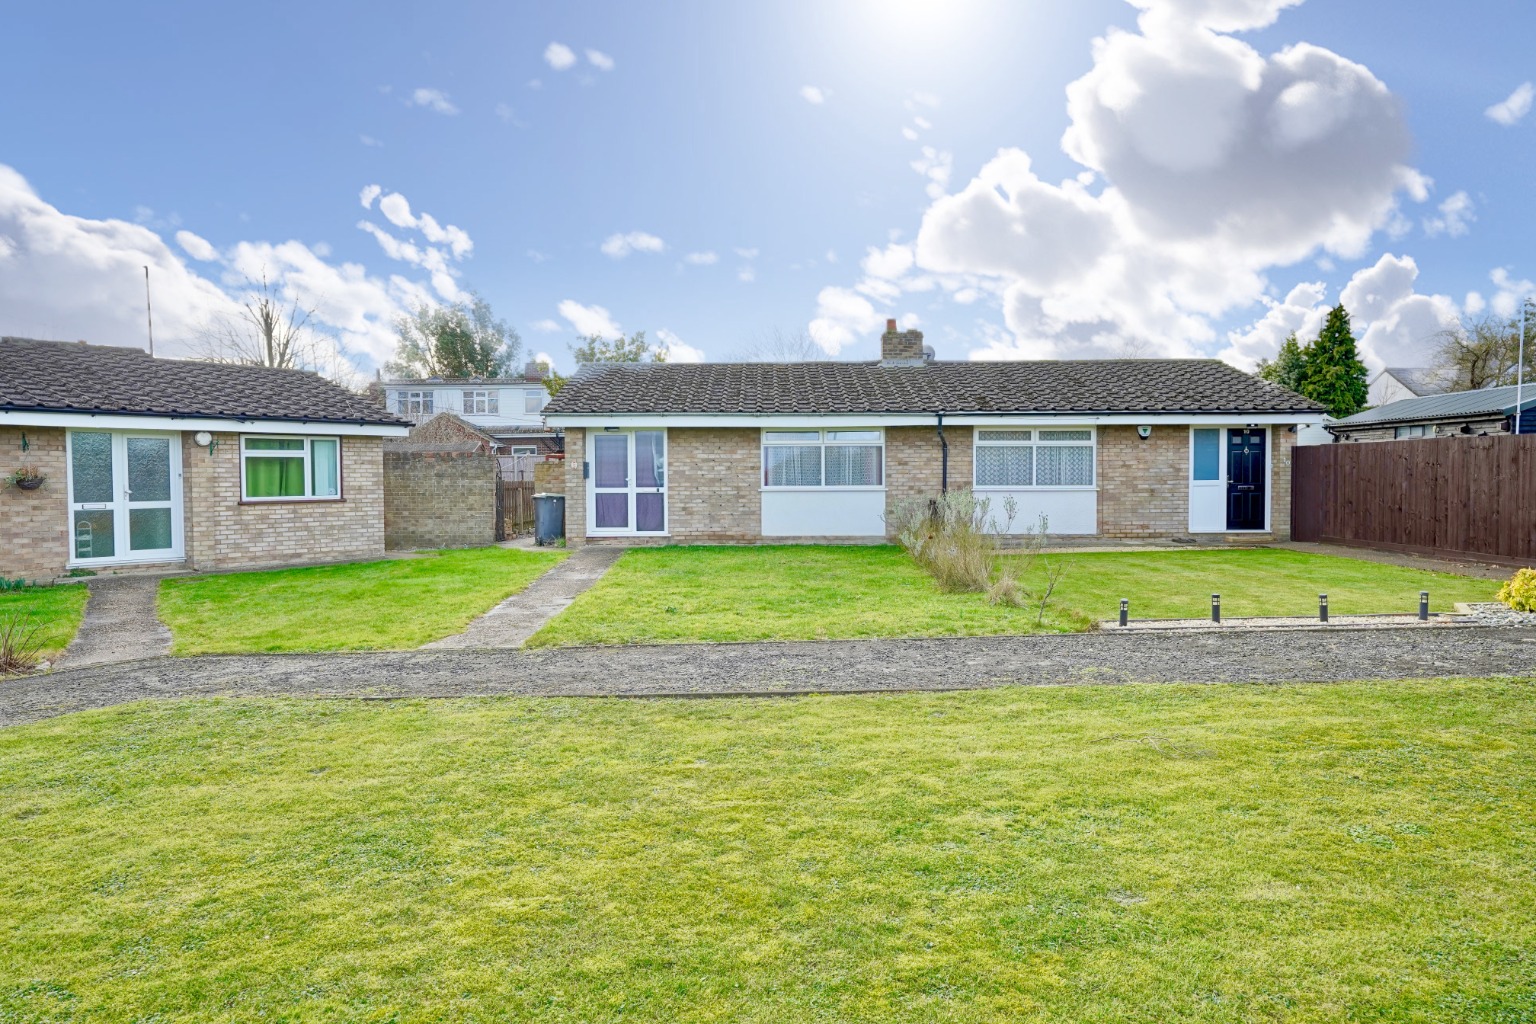 We are pleased to offer for sale this rarely available semi detached bungalow situated in the popular village of Roxton. The property benefits from a spacious lounge, garden room, re-fitted kitchen, bathroom and a double bedroom with views over the rear garden. There is parking available nearby